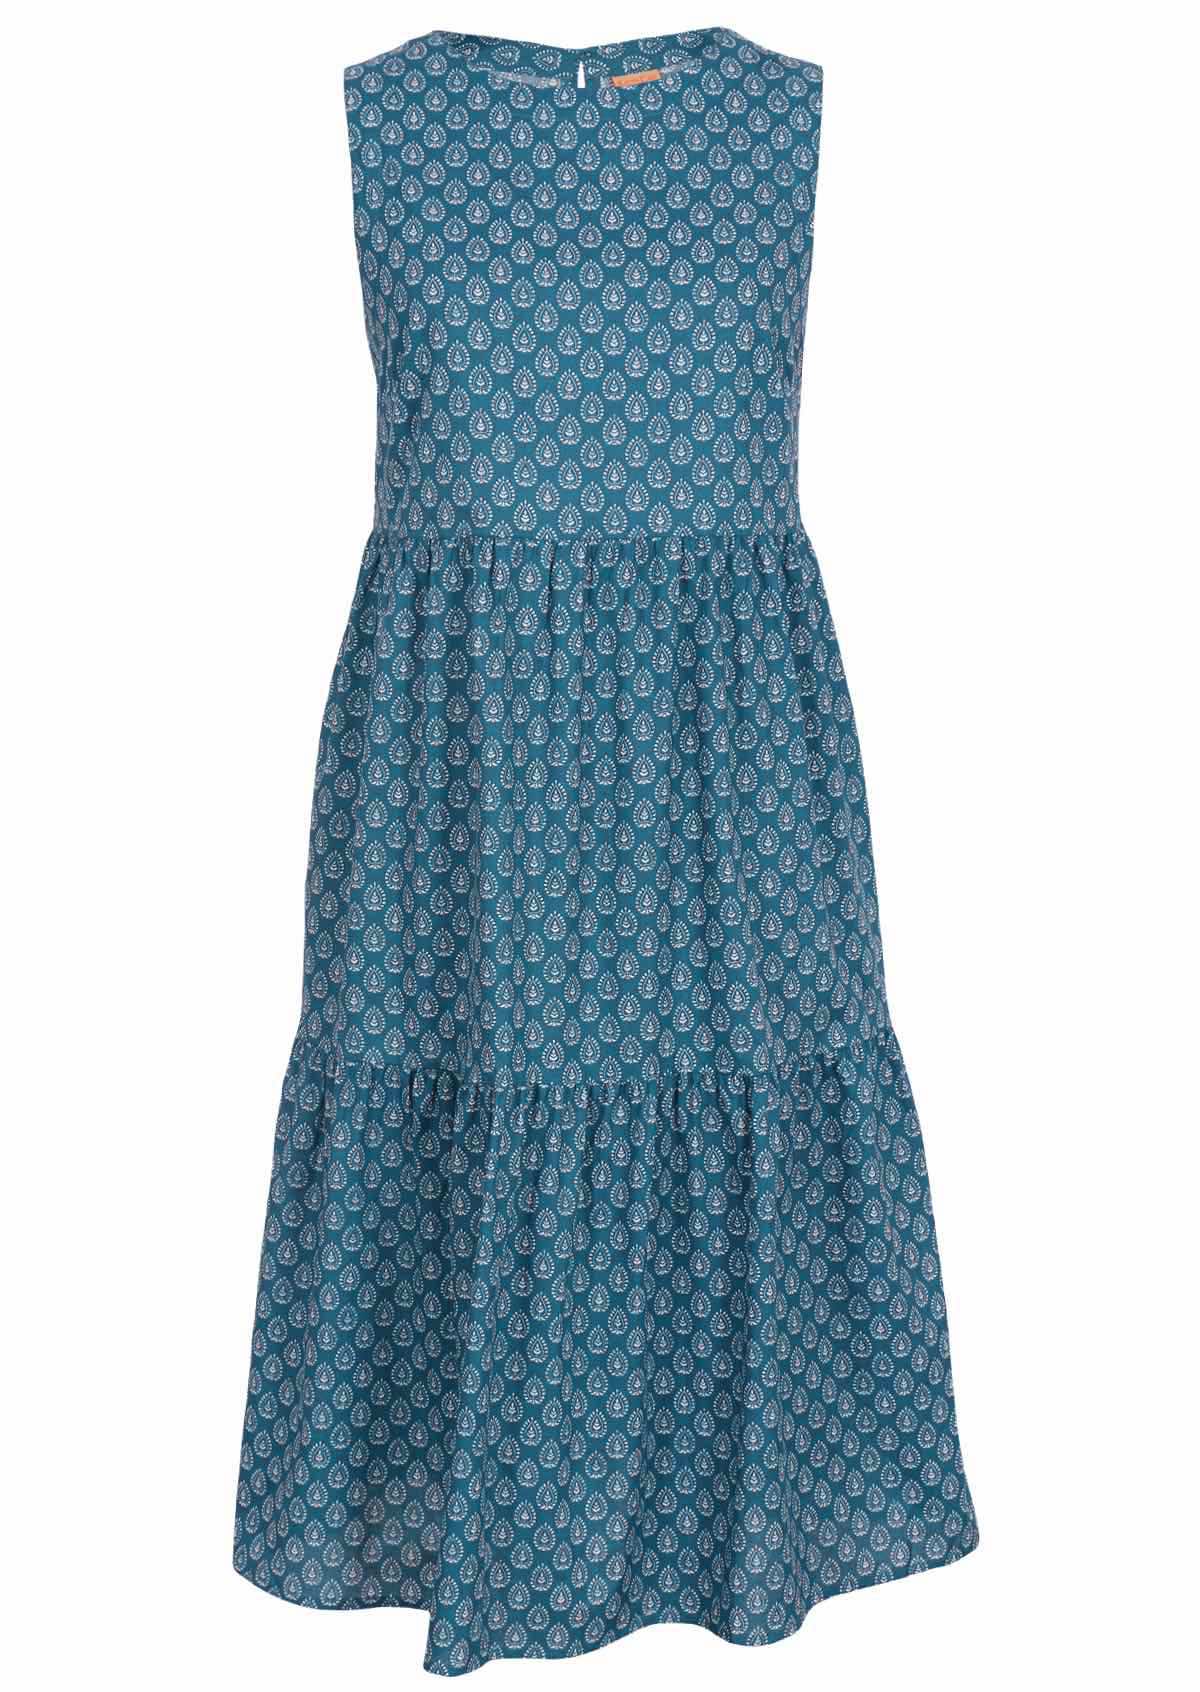 Sleeveless cotton dress with a white pattern on a blue base. 